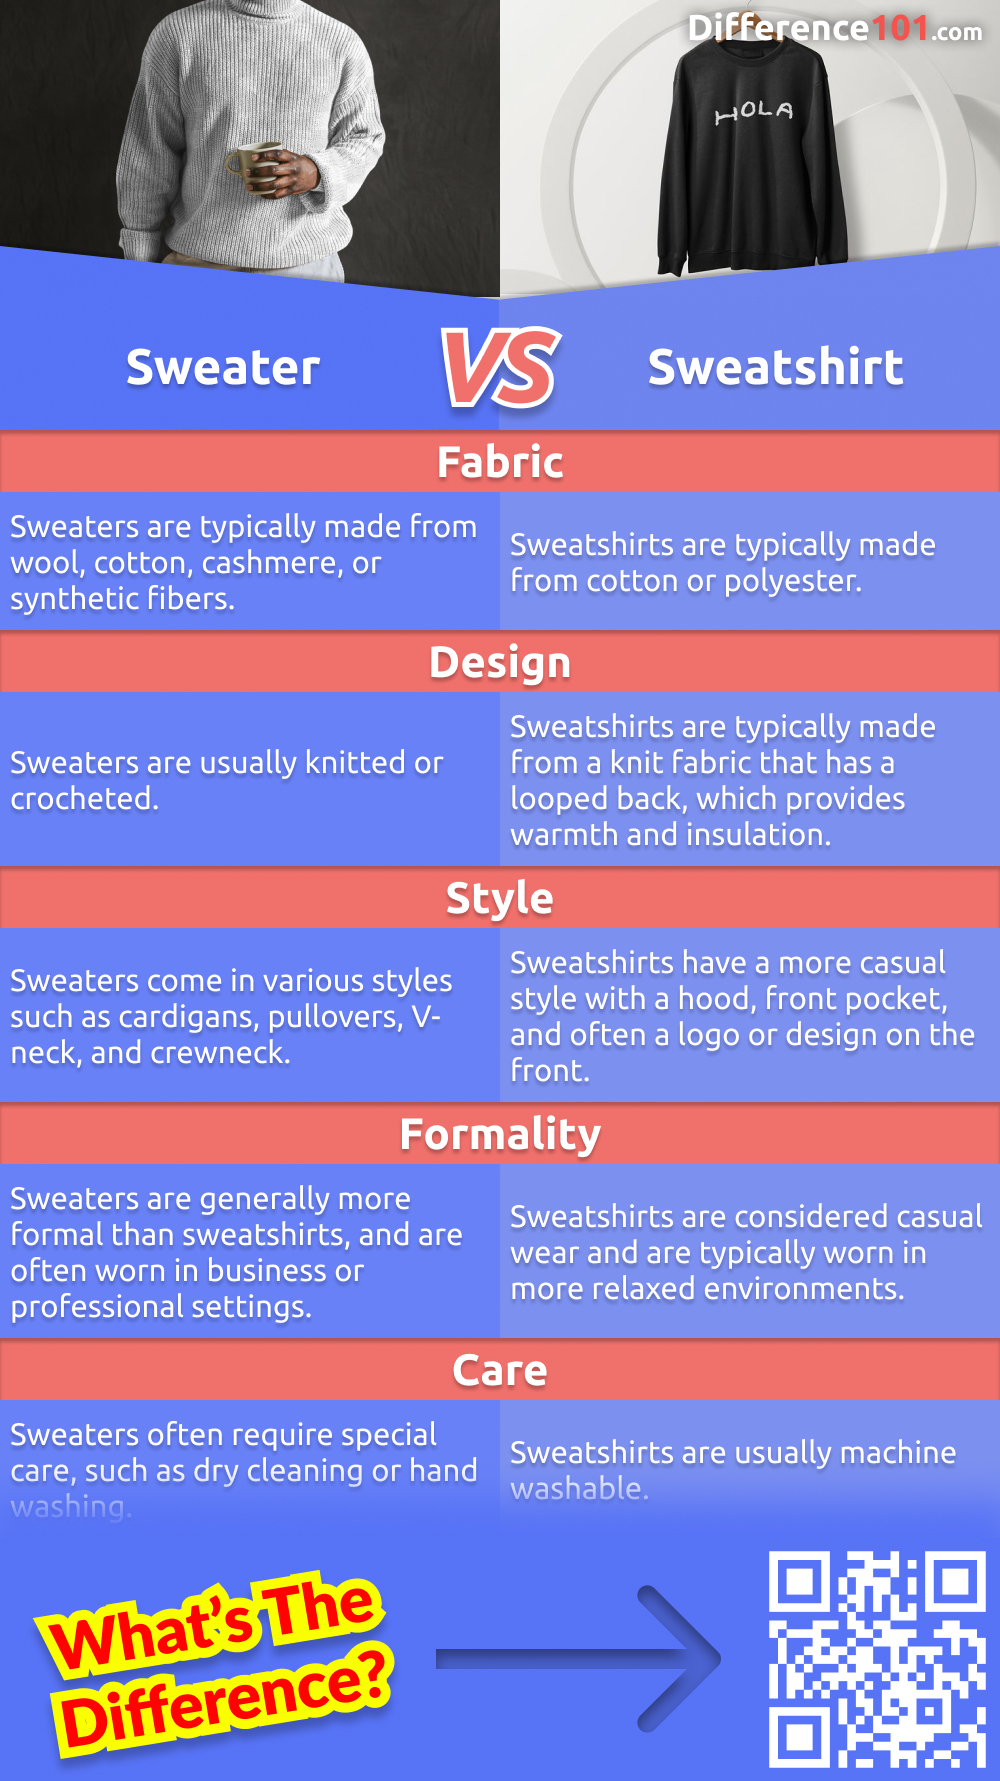 What's the difference between a sweater and a sweatshirt? We break it down for you so you can choose the right piece of clothing for the occasion. Learn more about the pros and cons of each.